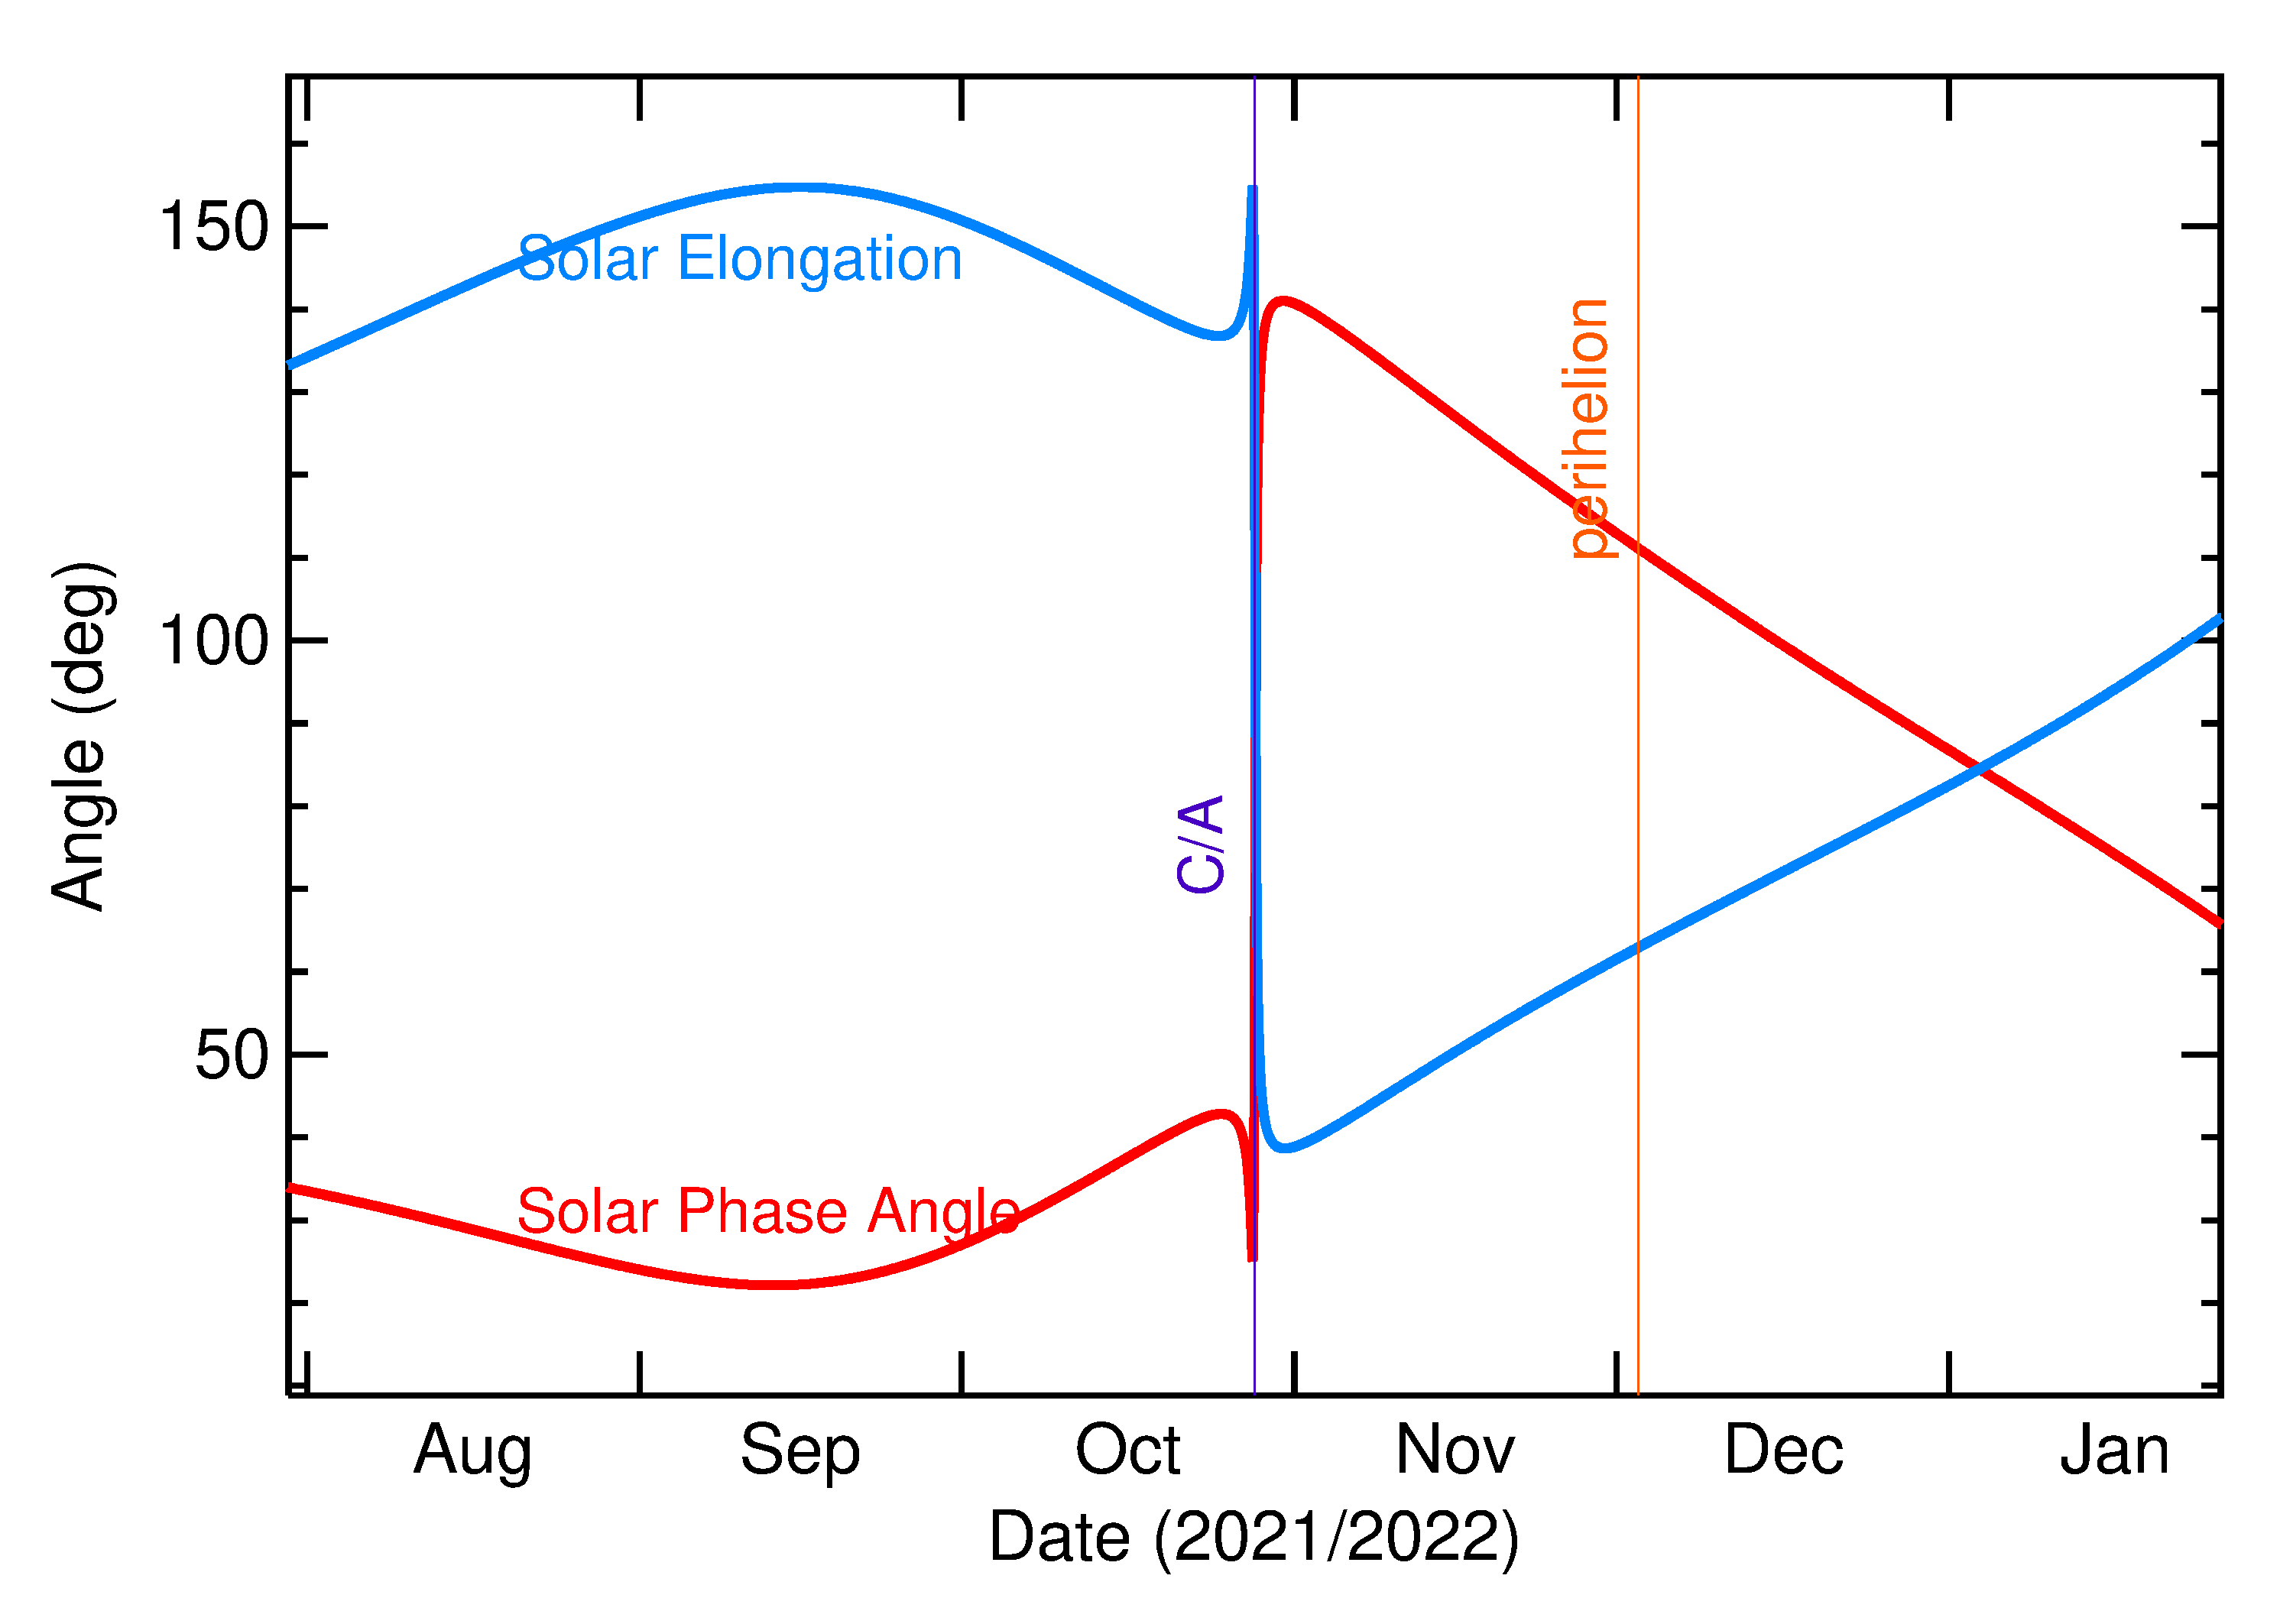 Solar Elongation and Solar Phase Angle of 2021 UH1 in the months around closest approach